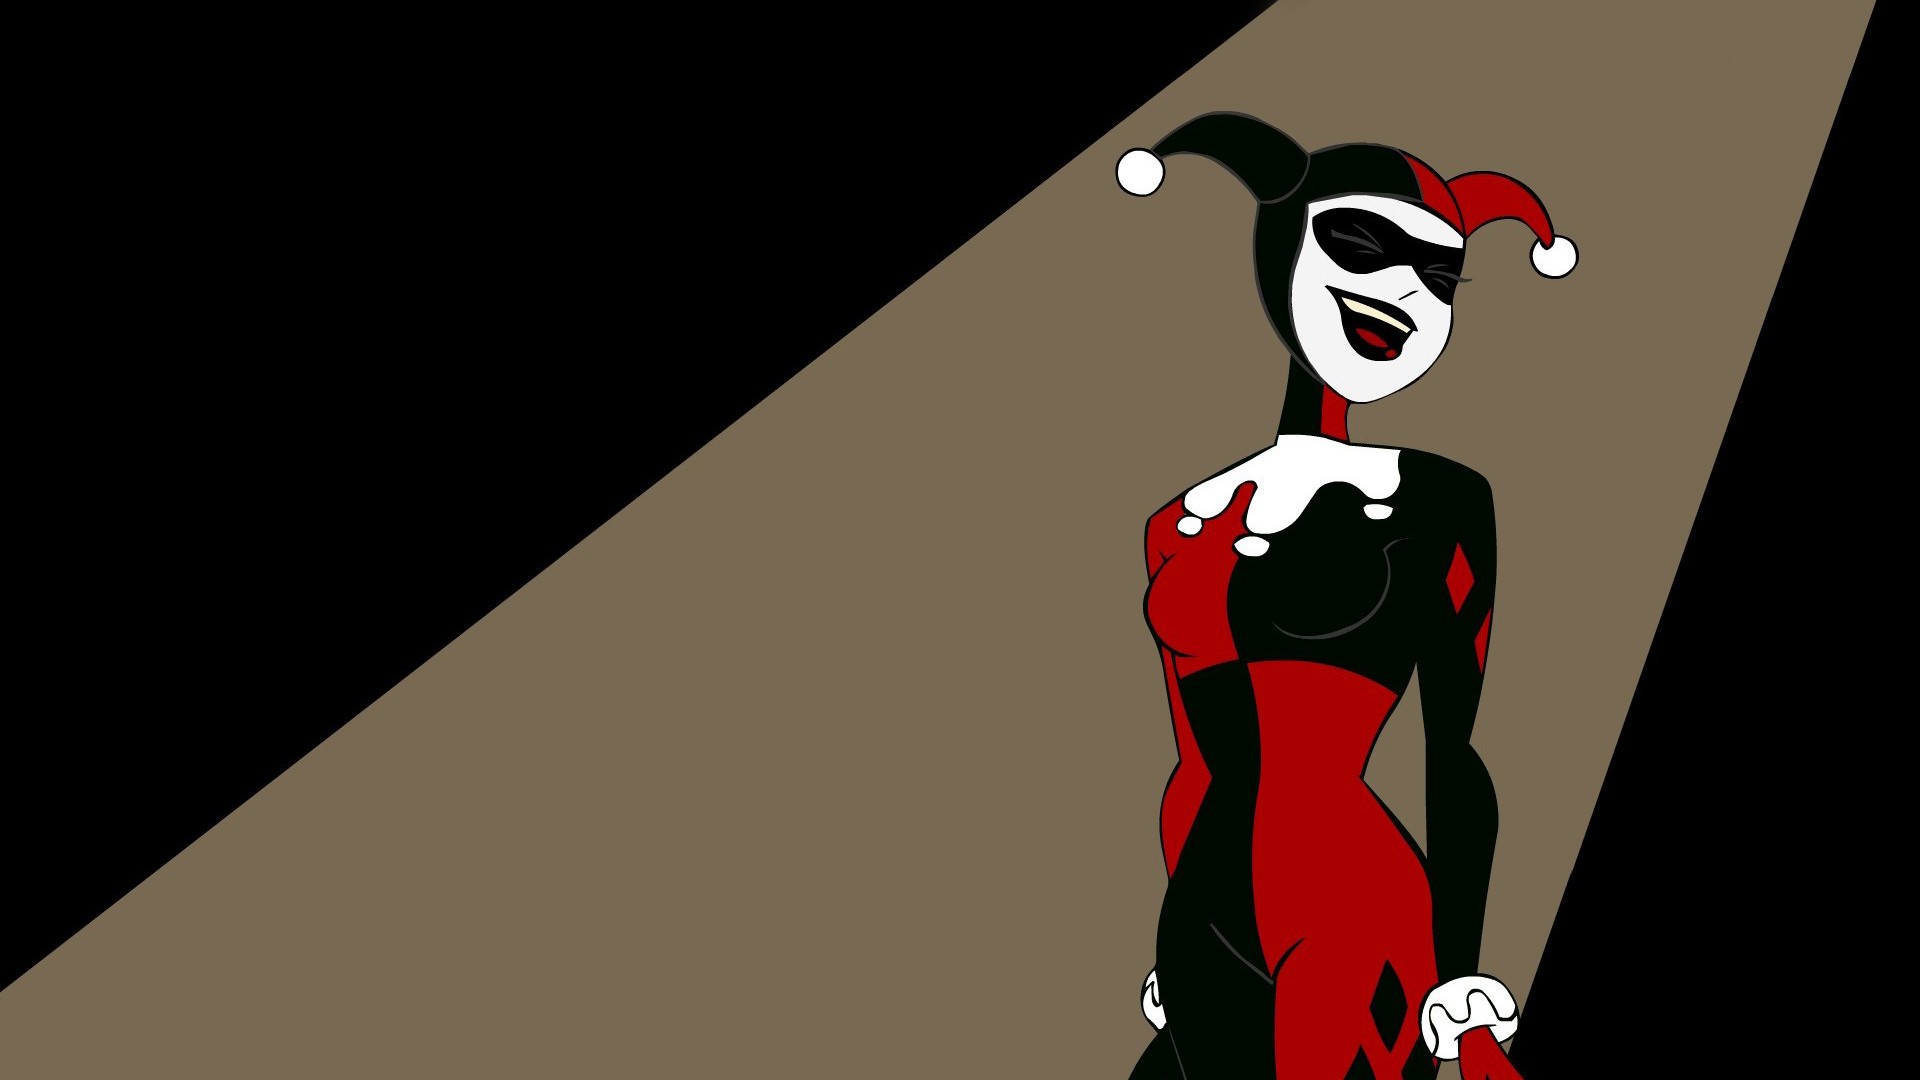 Wallpaper Harley Quinn Movie with image resolution 1920x1080 pixel. You can use this wallpaper as background for your desktop Computer Screensavers, Android or iPhone smartphones